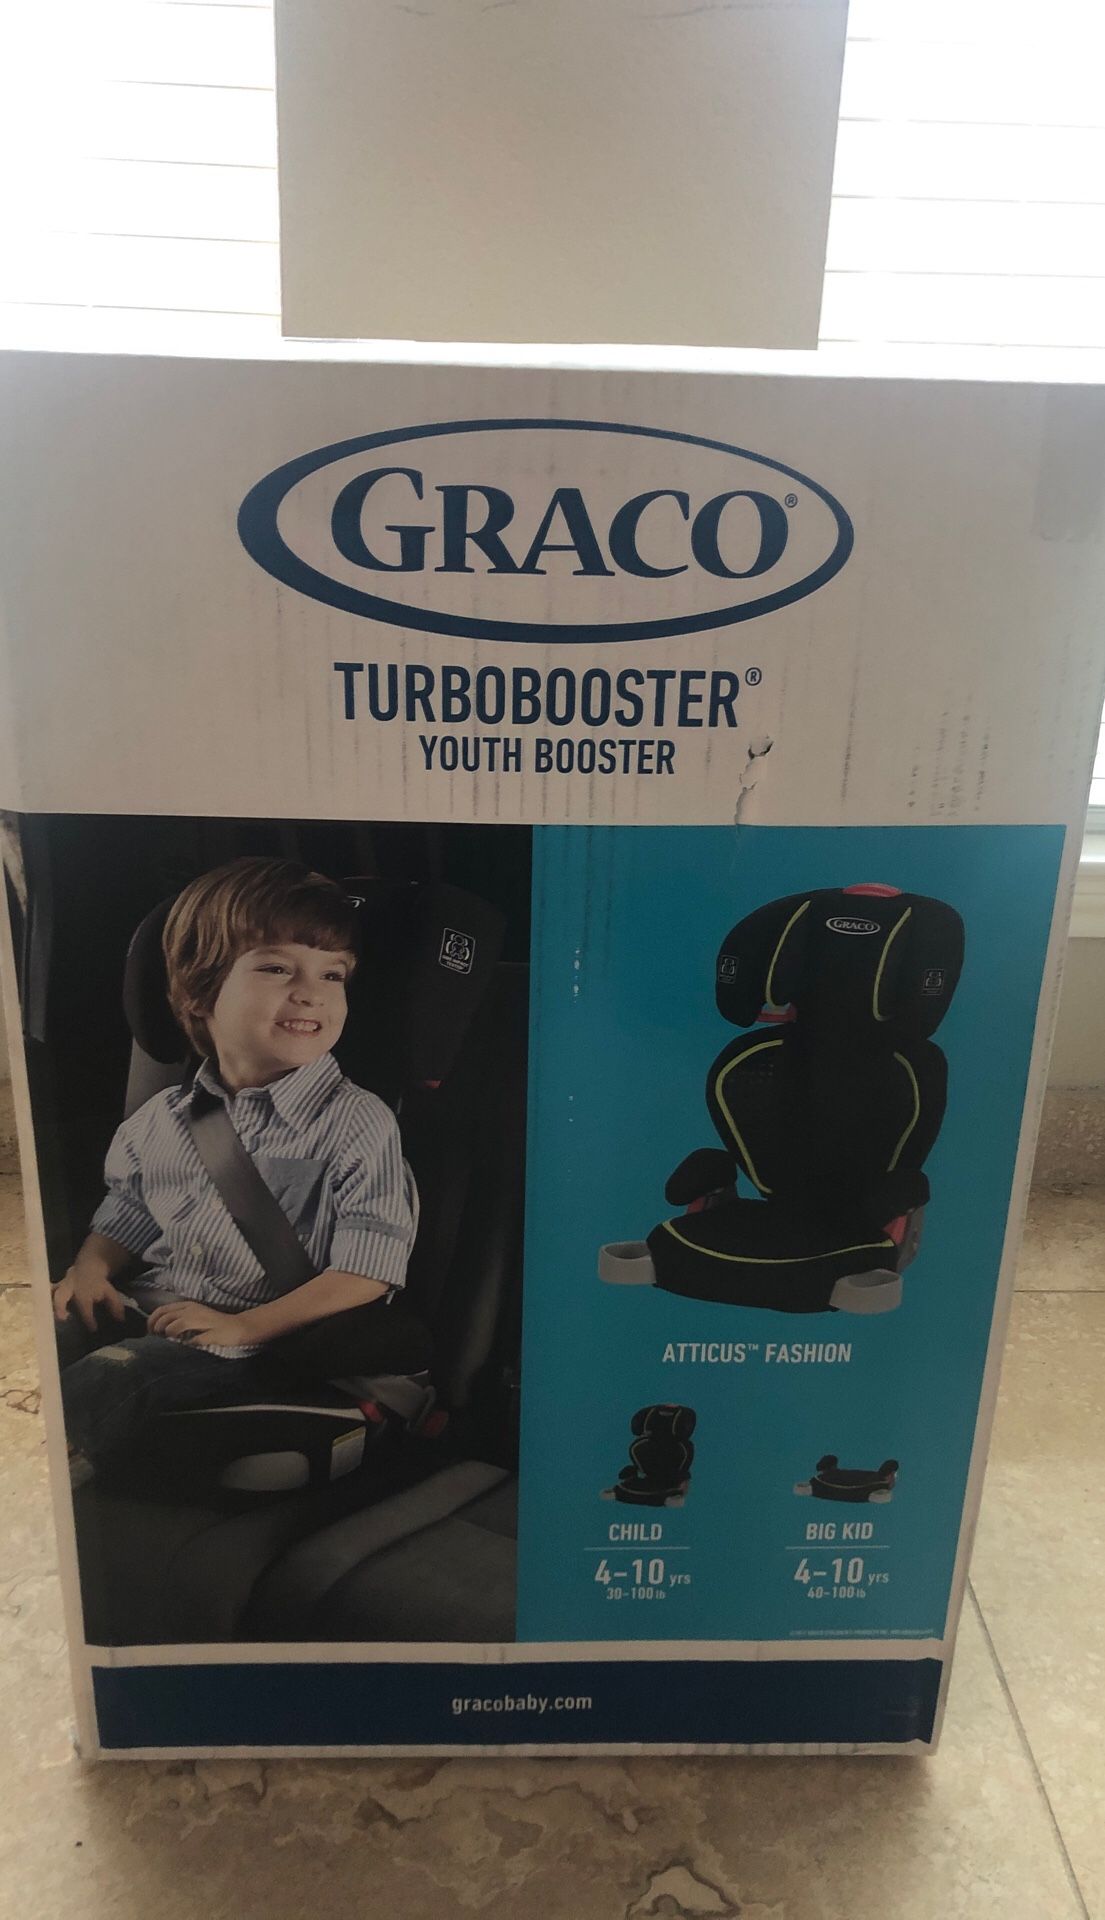 Grace turbo booster car seat